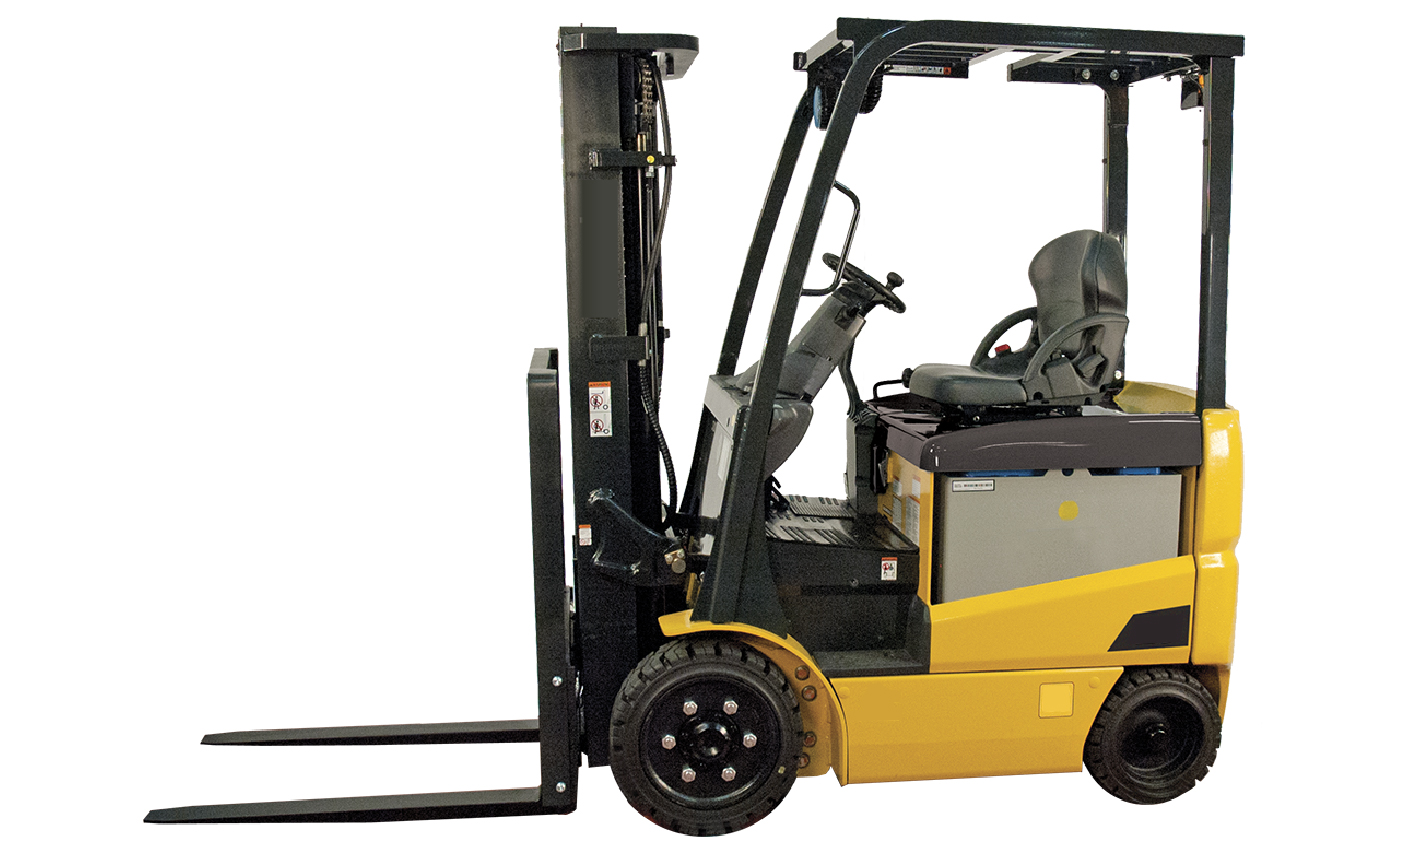 A yellow forklift truck on a white background.